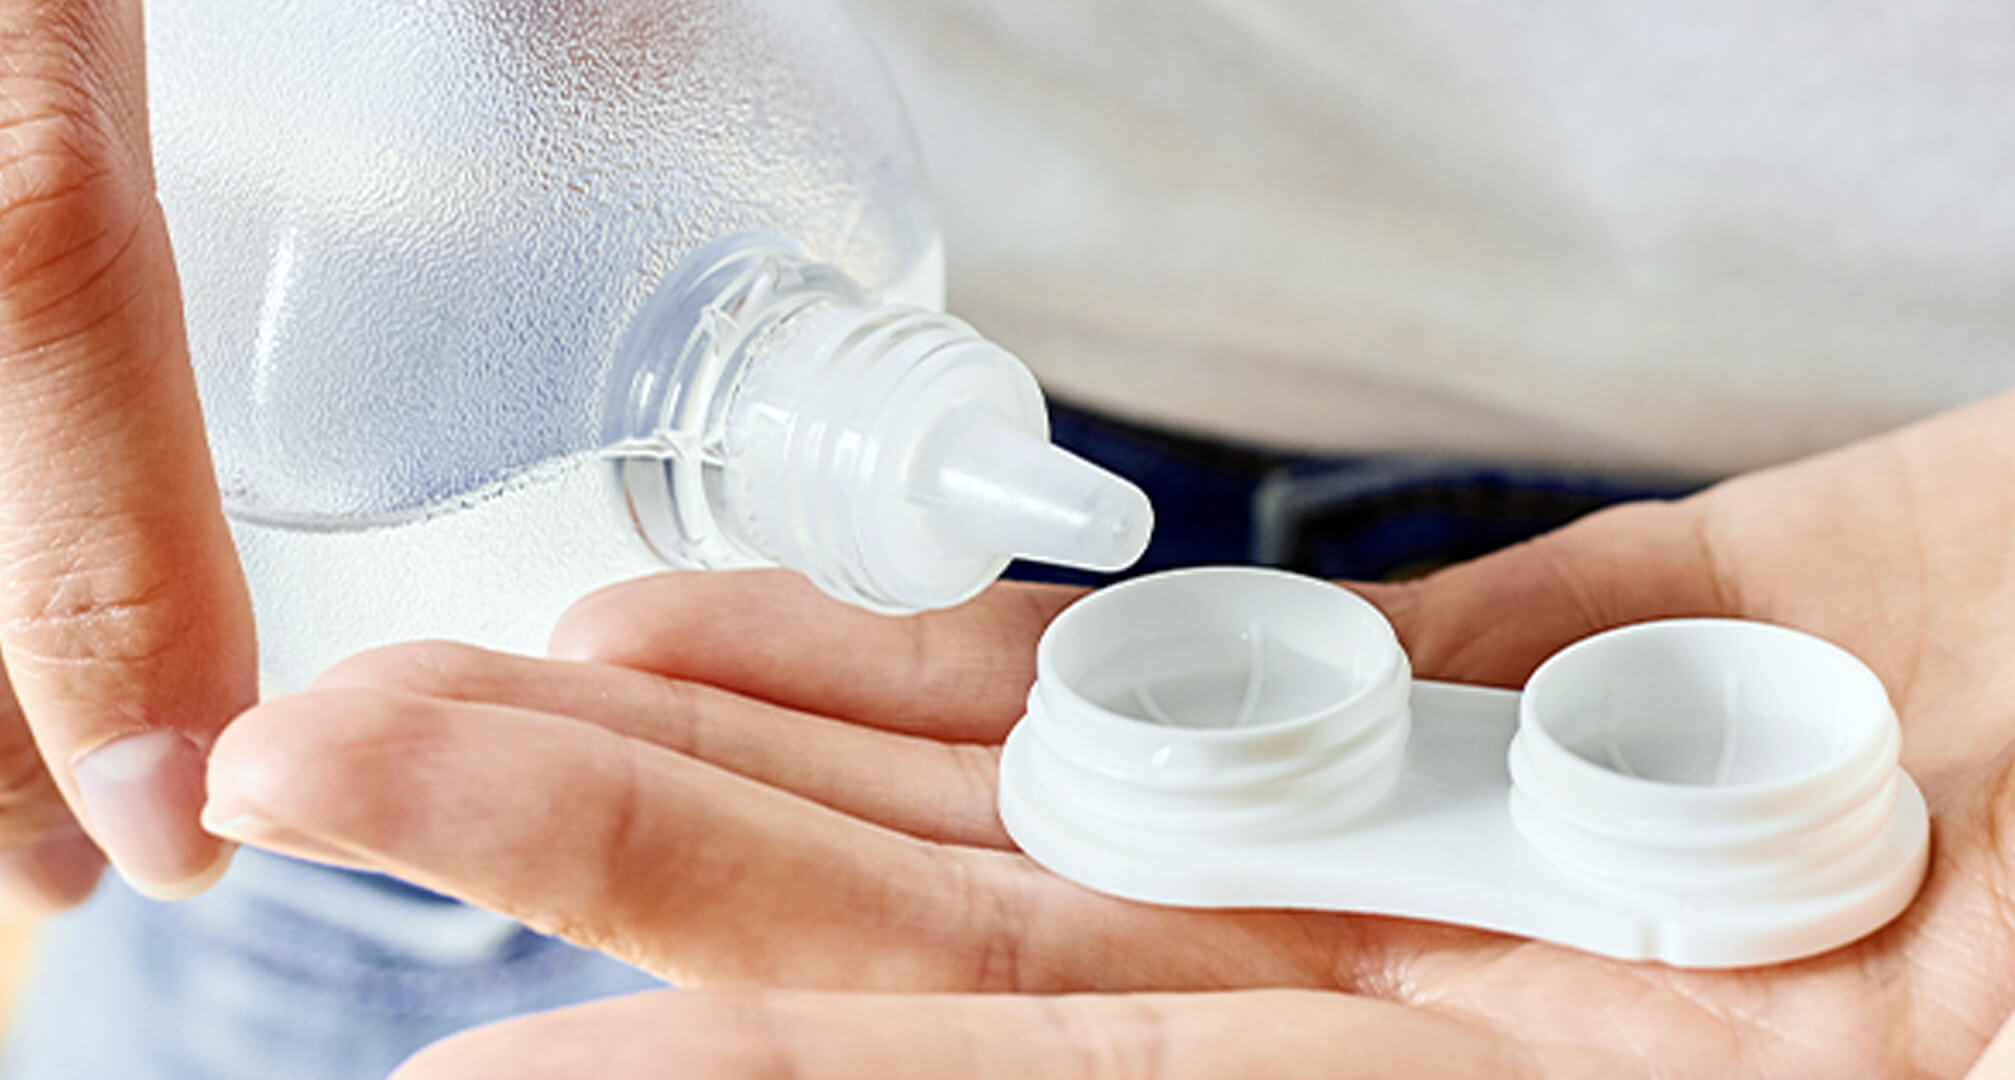 hand holding contact lens case with solution